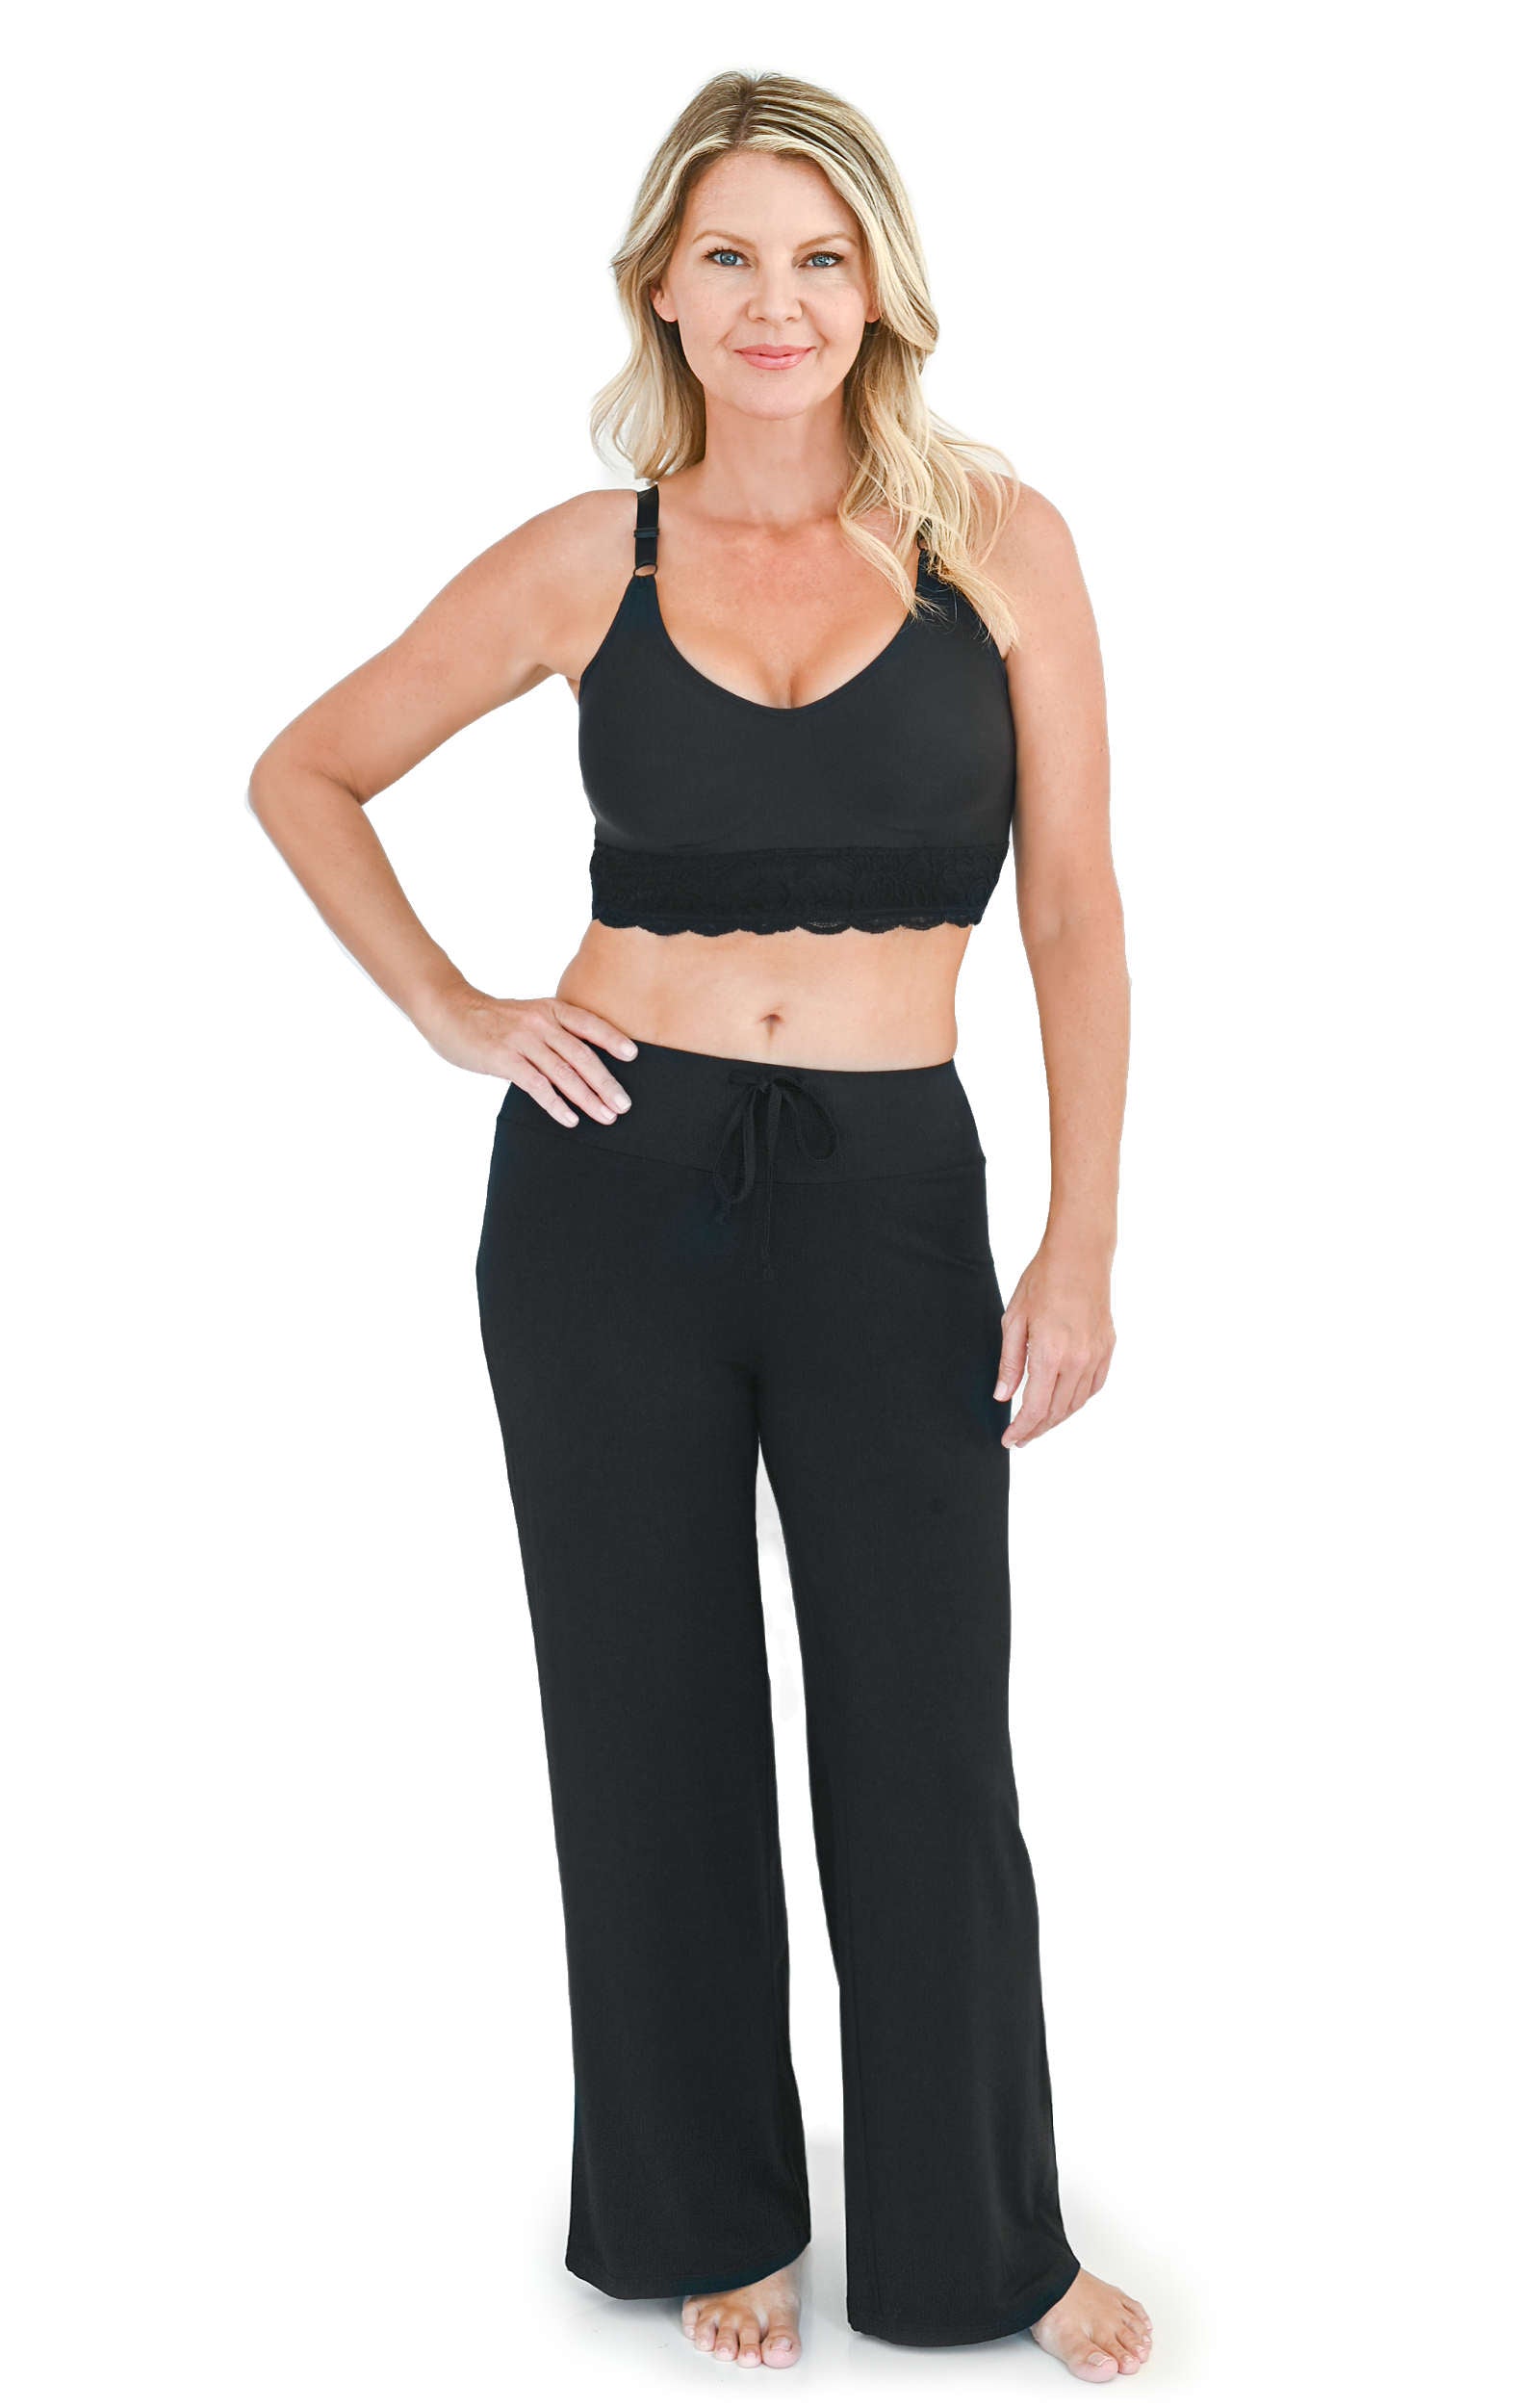 Aflowyii Modal Pajama Pants for Women Bamboo Lounge Pants with